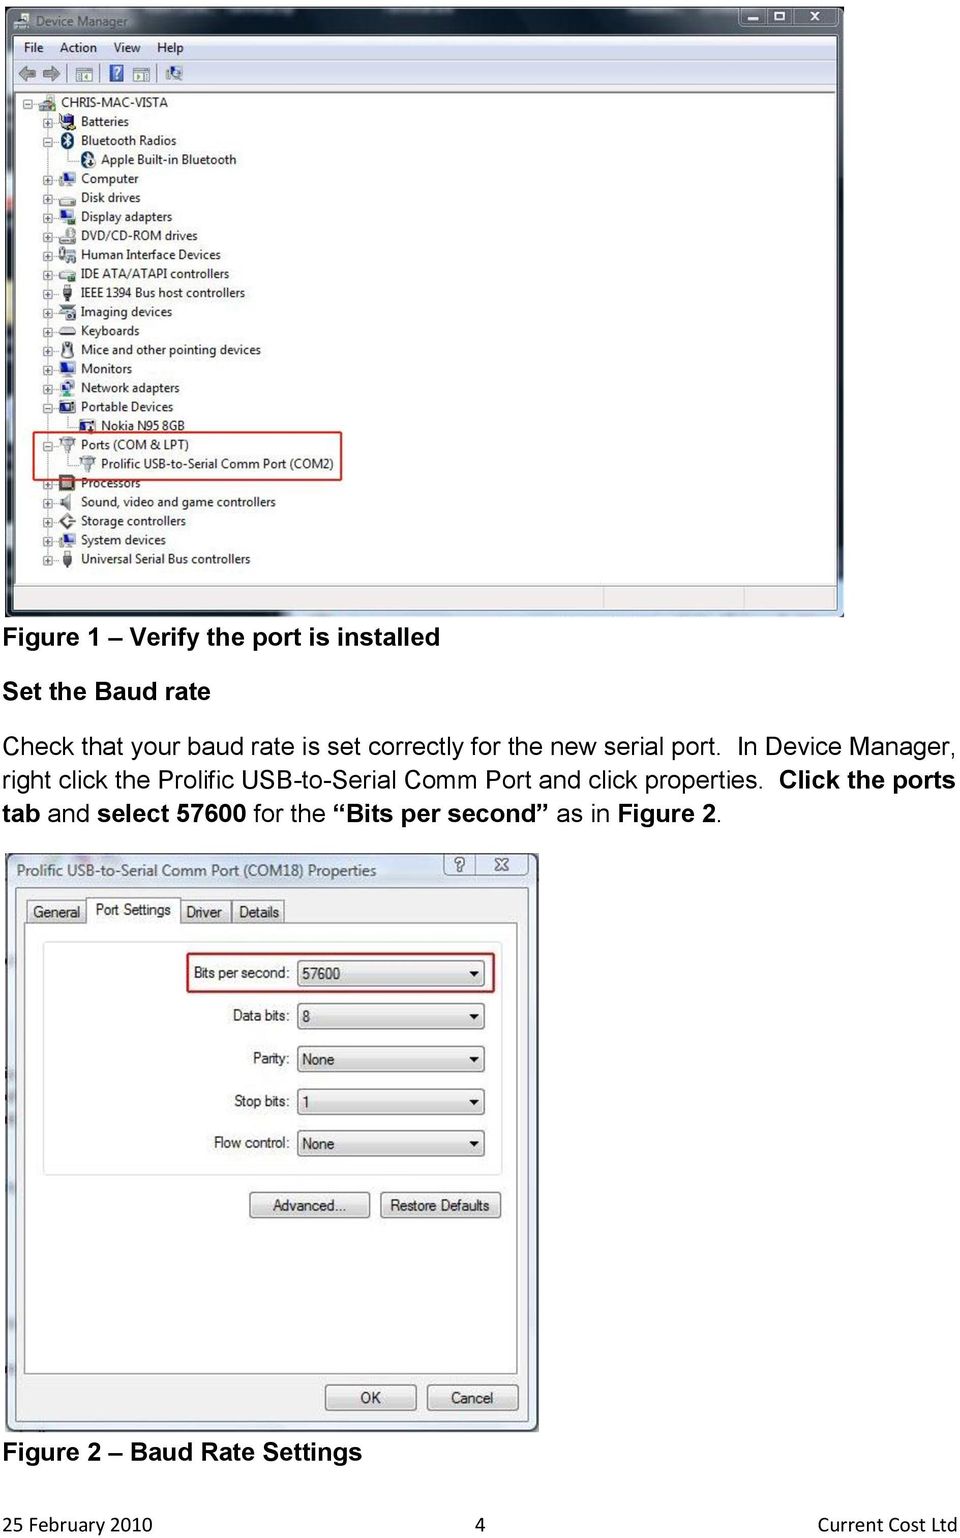 In Device Manager, right click the Prolific USB-to-Serial Comm Port and click properties.